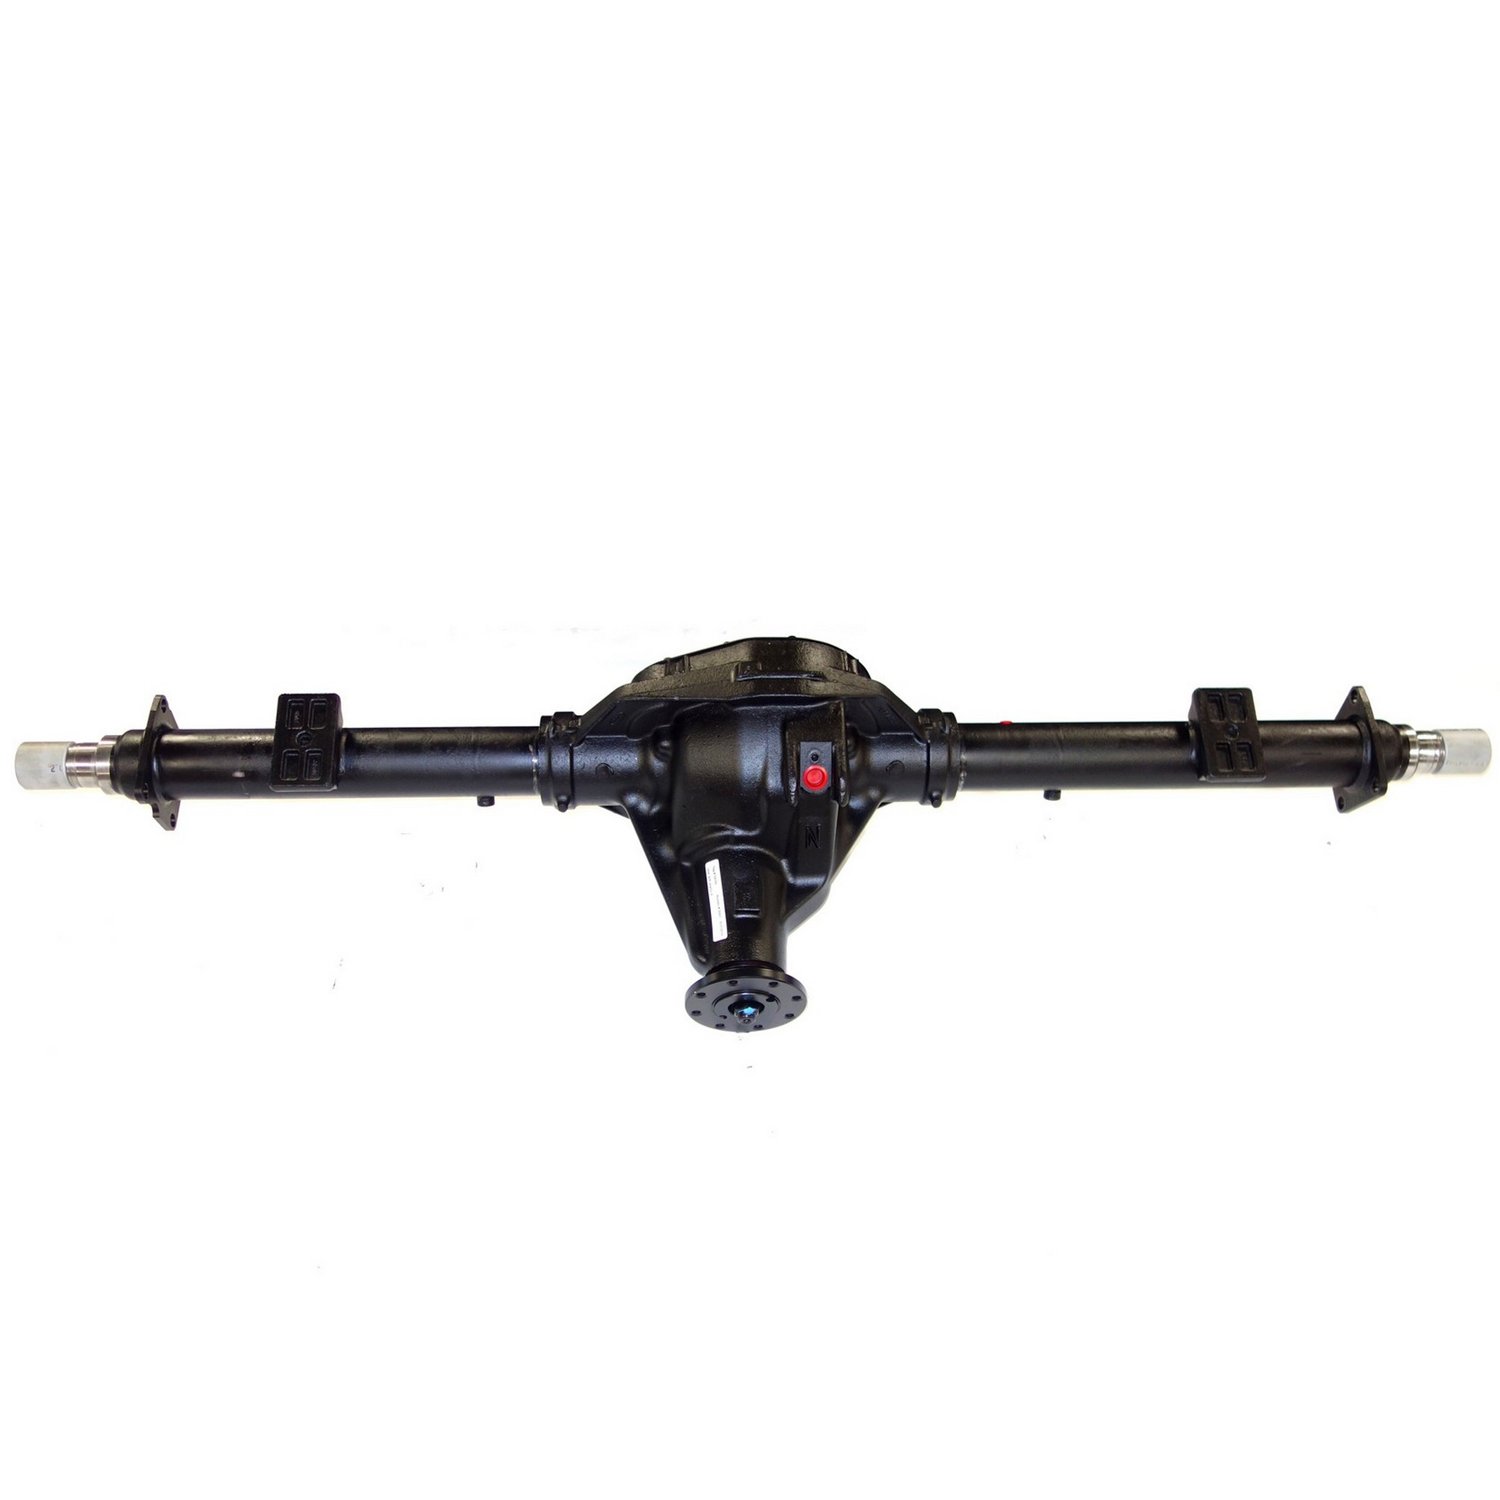 Remanufactured Axle Assy for 10.5" 99-00 Excursion 4.10 , SRW, Posi LSD *Check Tag*